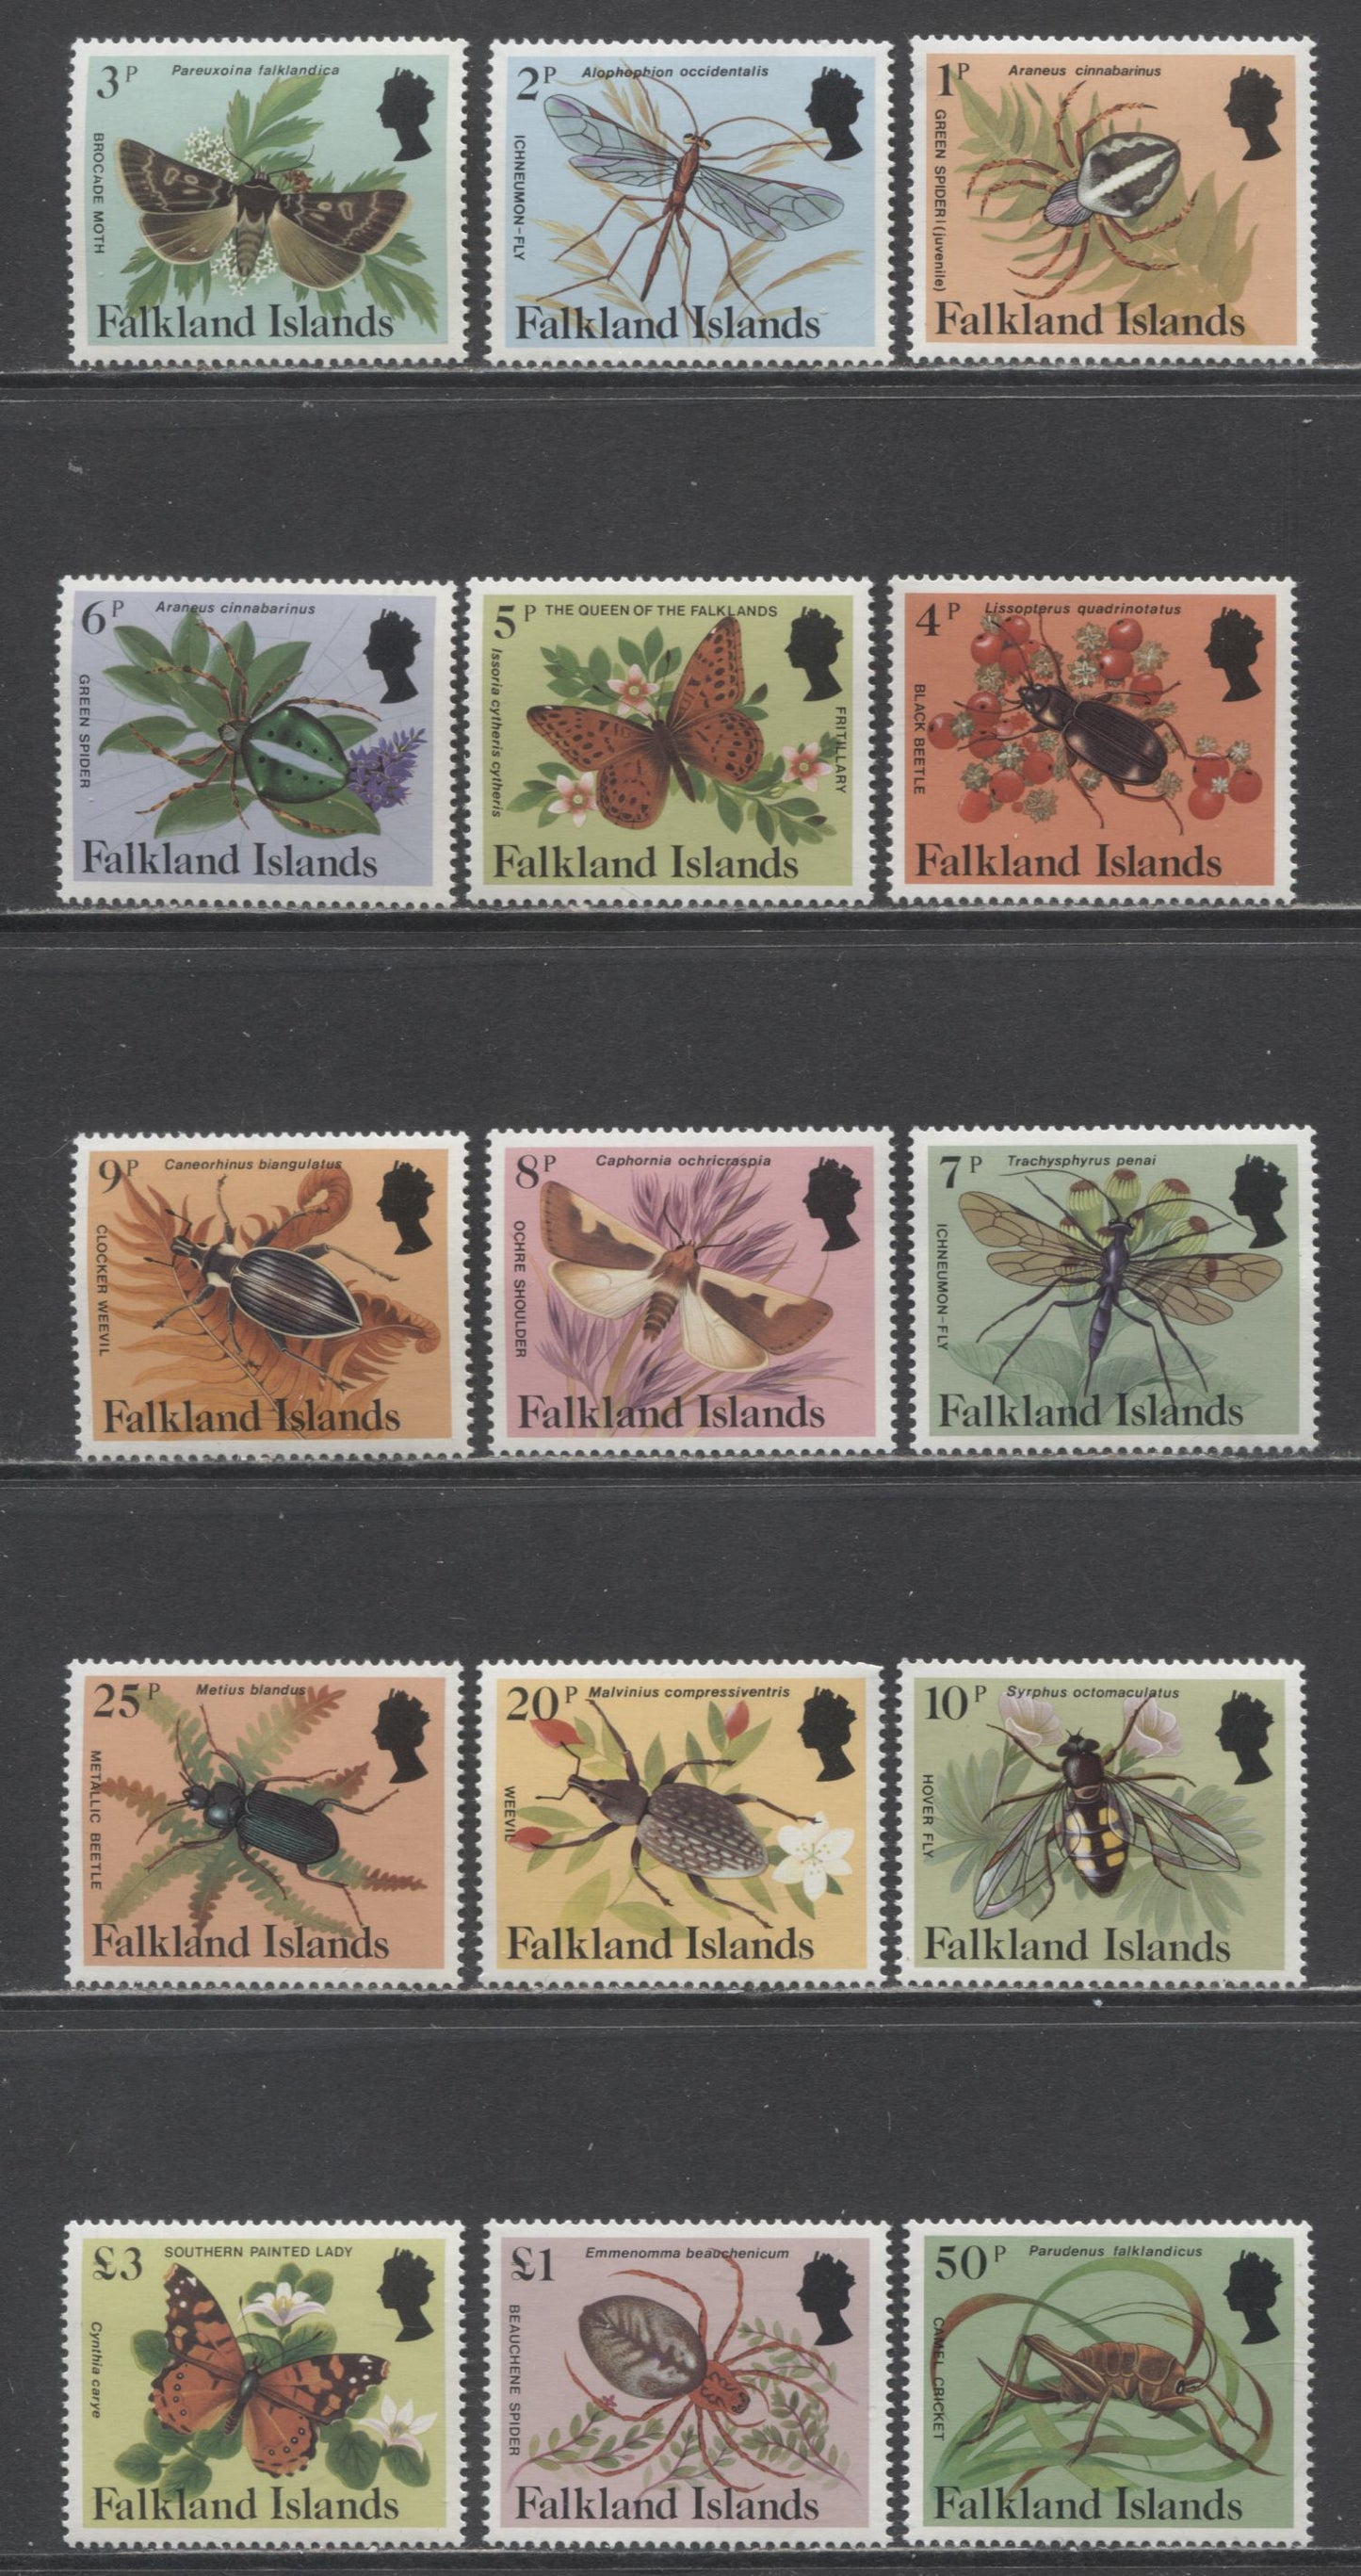 Lot 177 Falkland Islands SC#387-401 1984 Insect & Spider Issues, 15 VFNH Singles, Click on Listing to See ALL Pictures, 2017 Scott Cat. $18.35